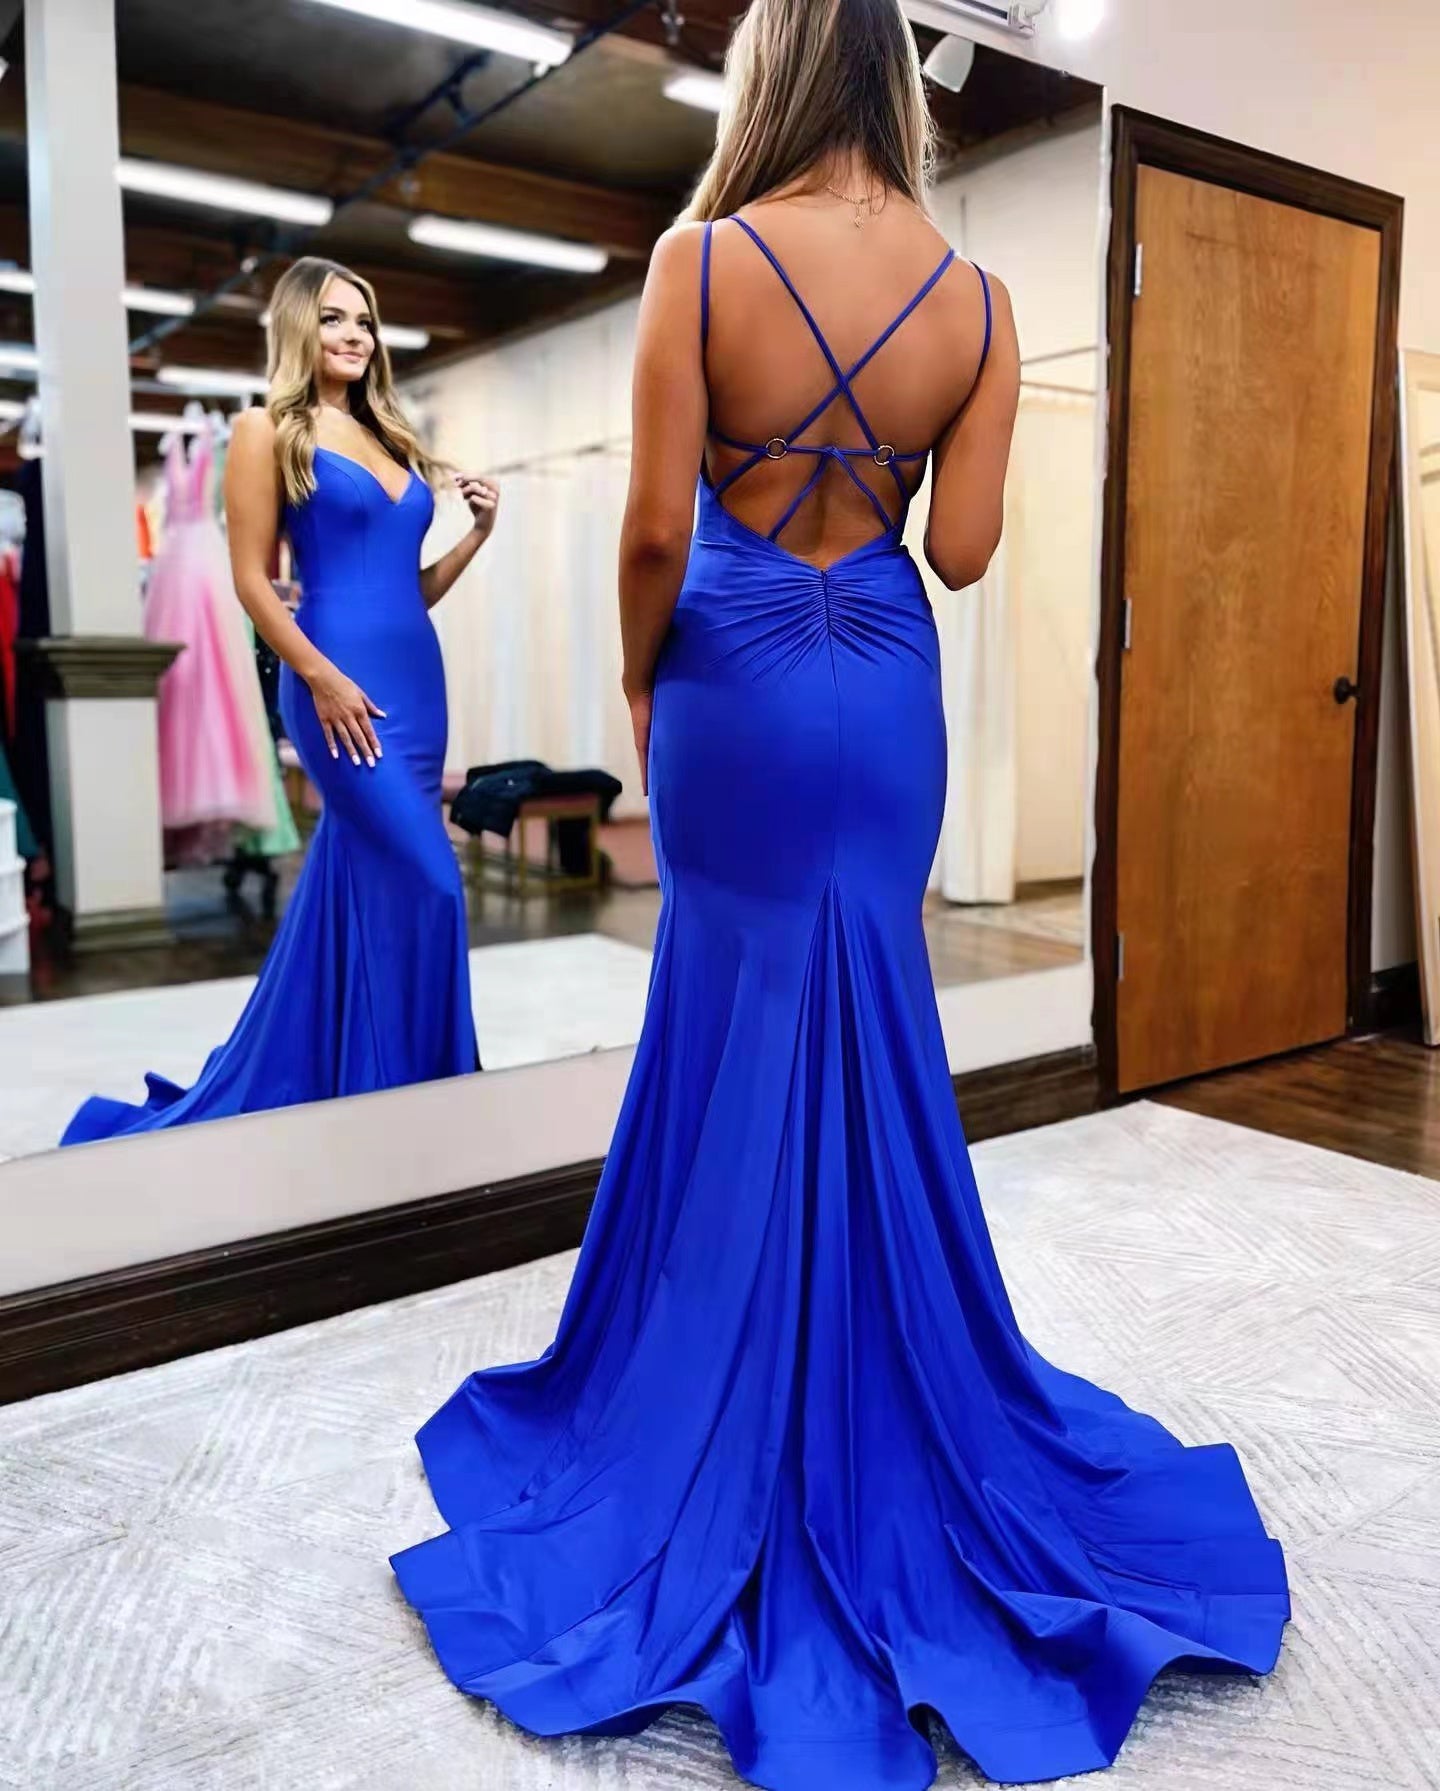 Popular Mermaid Long Prom Dresses, Newest Girl Evening Party Dresses, Wedding Guest Dresses